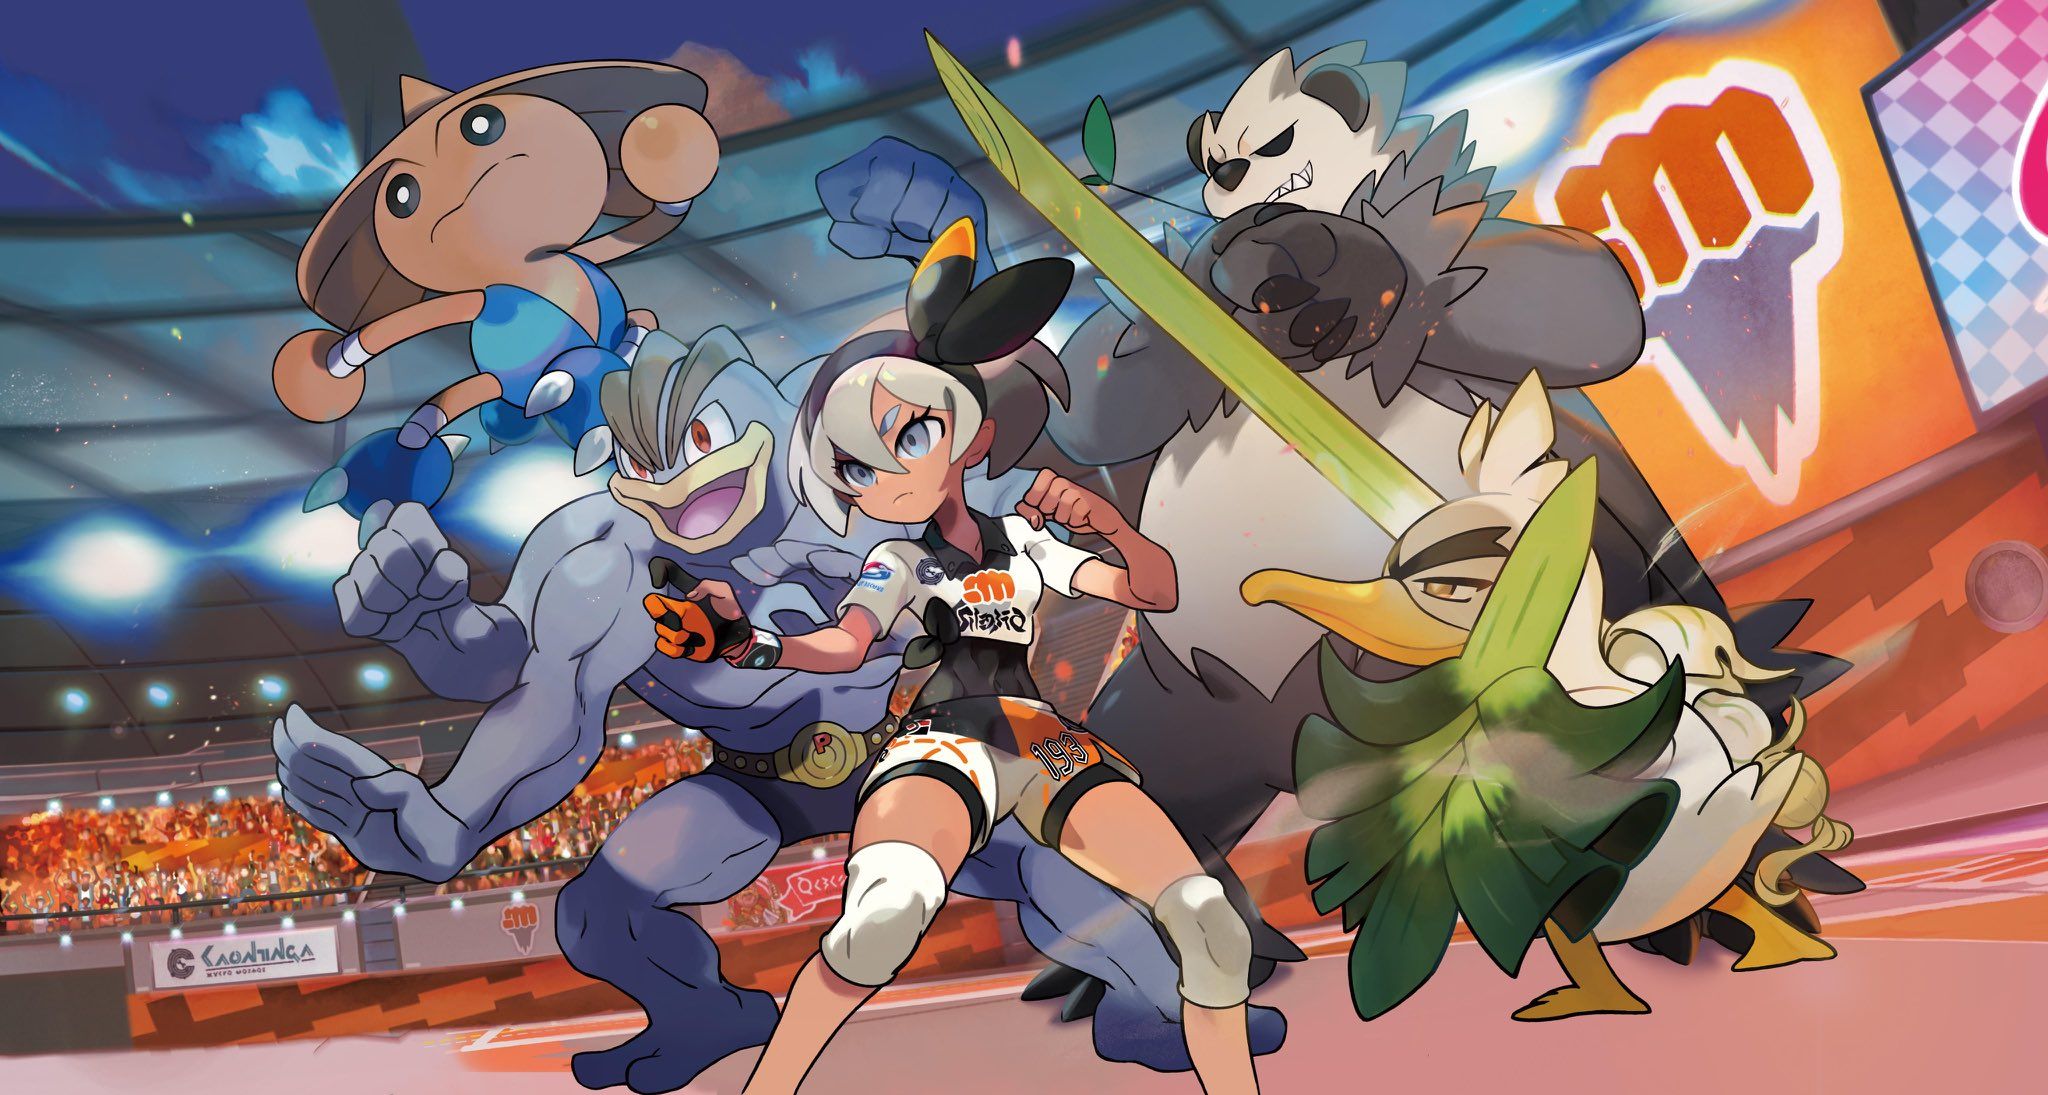 PokéJungle a new wallpaper? Check out this 4K(!) art of Bea and her team released by Pokémon!